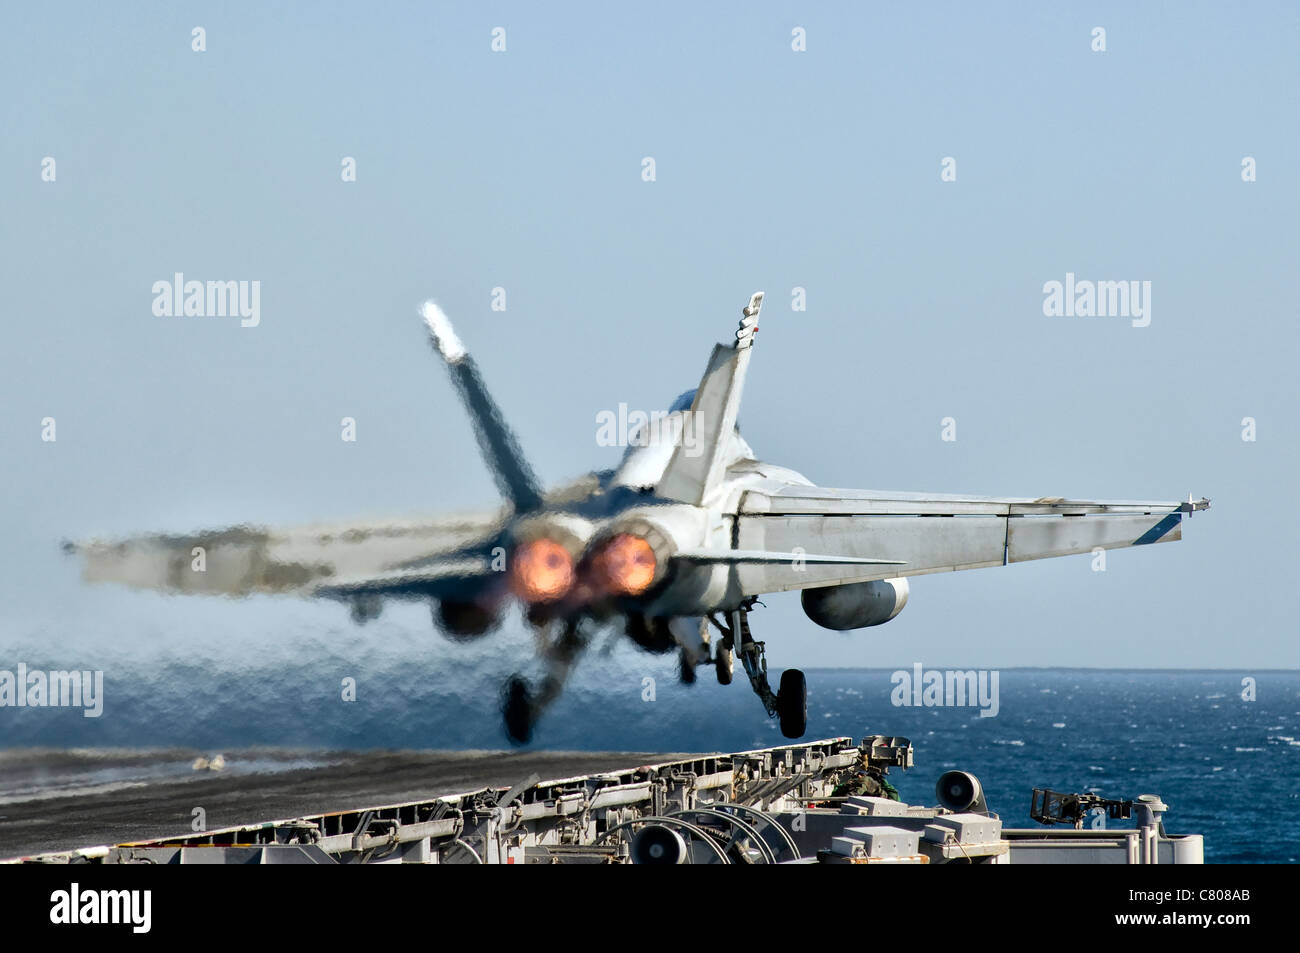 A US Navy F/A-18F Super Hornet launches from the flight deck of aircraft carrier USS Nimitz. Stock Photo